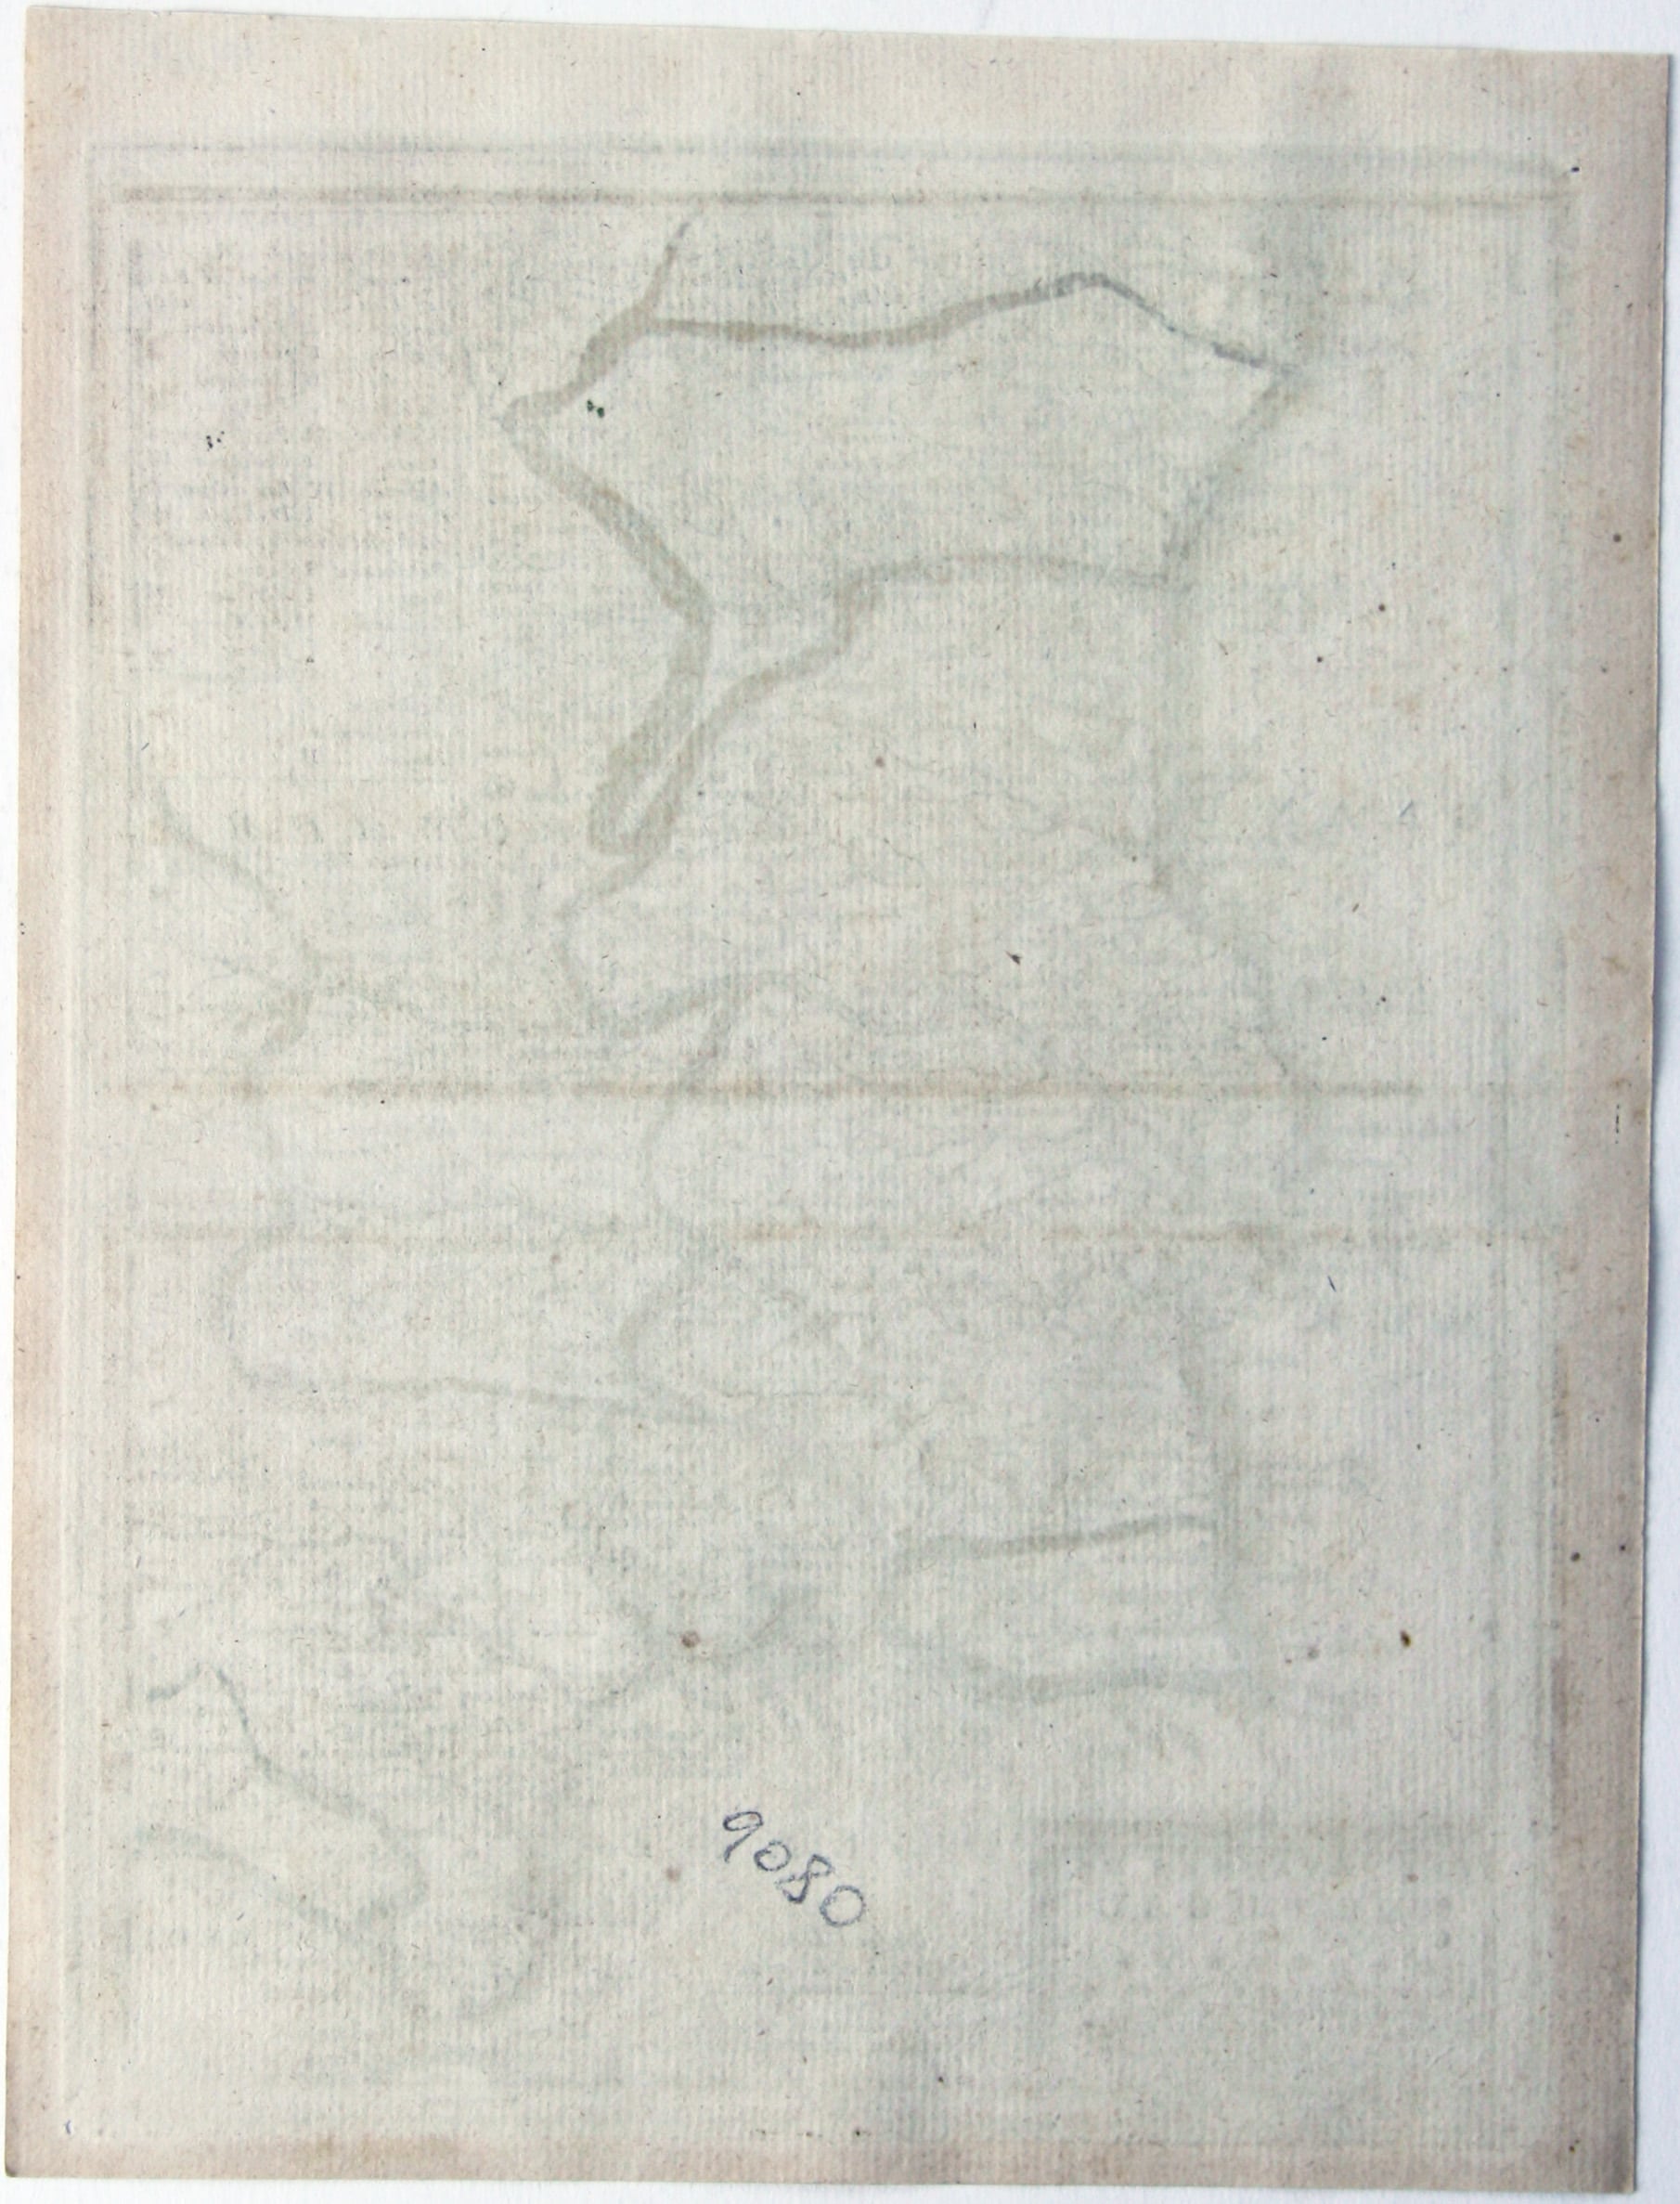 Chiquet’s Map of Portugal